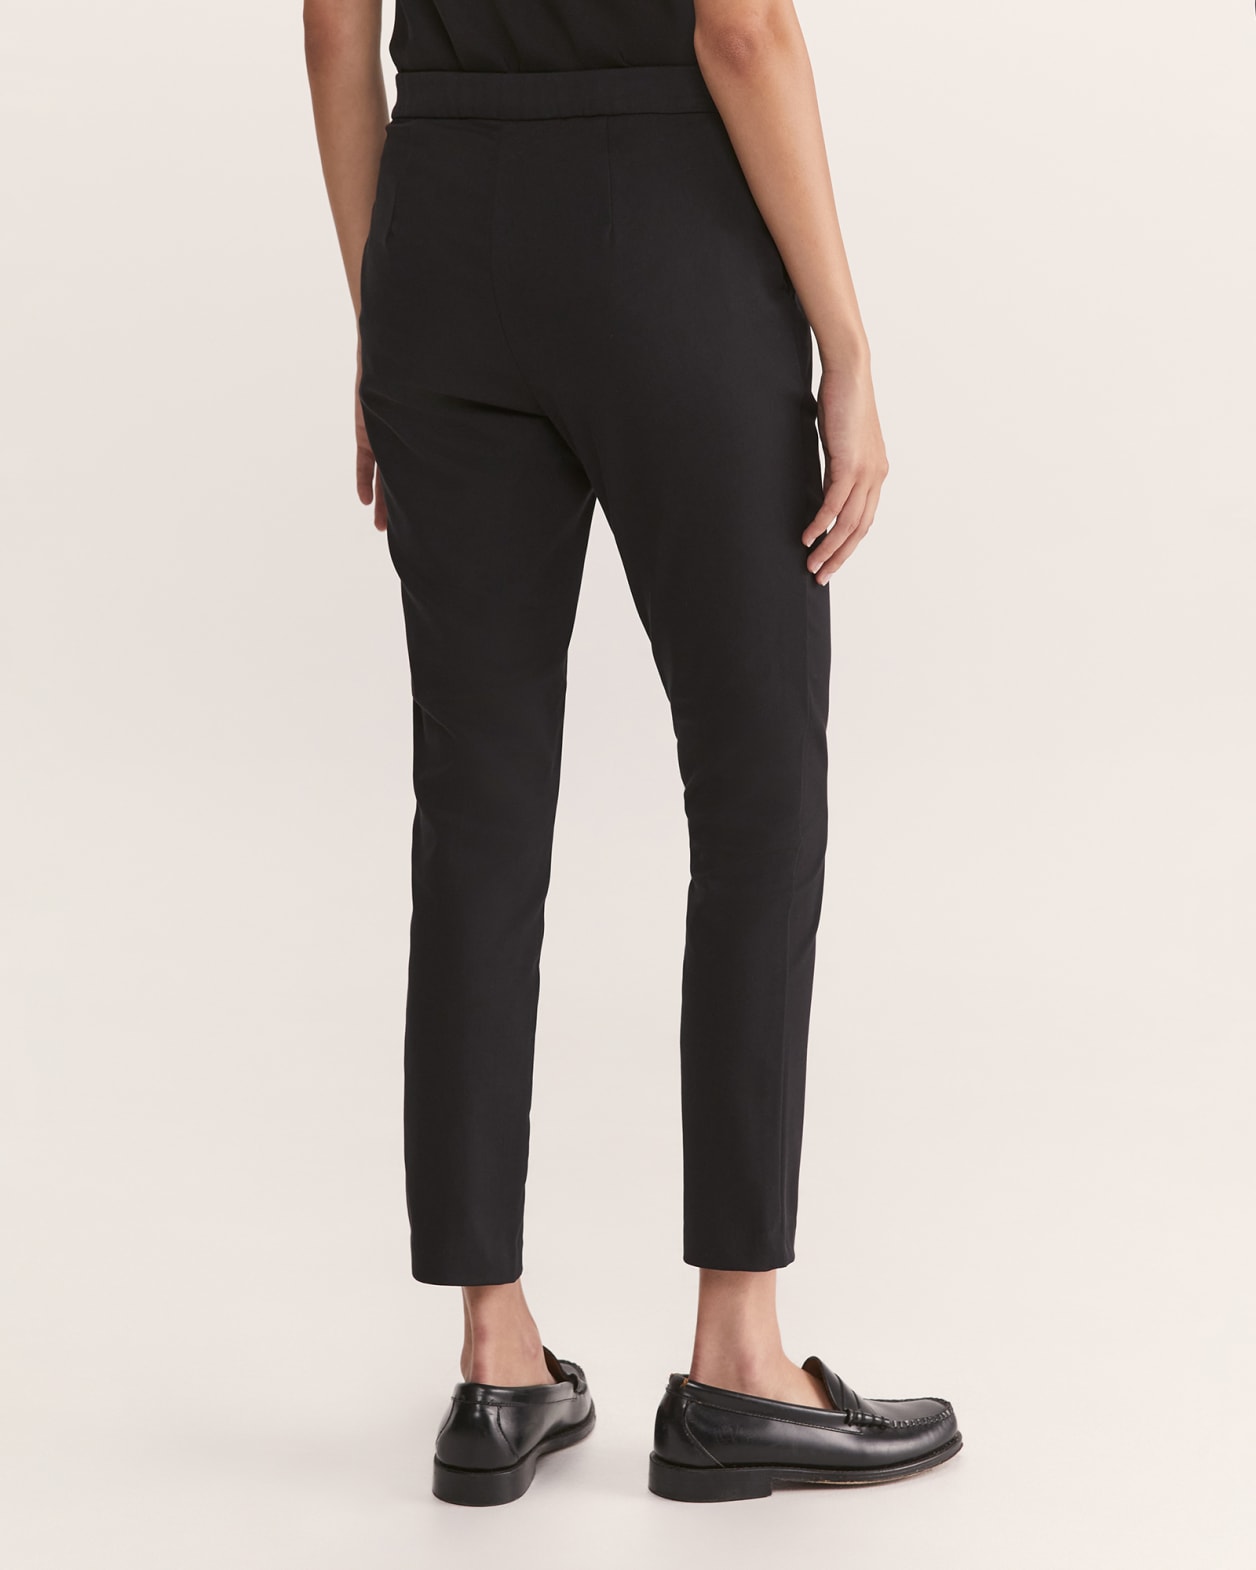 Tia Pull On Pant in BLACK